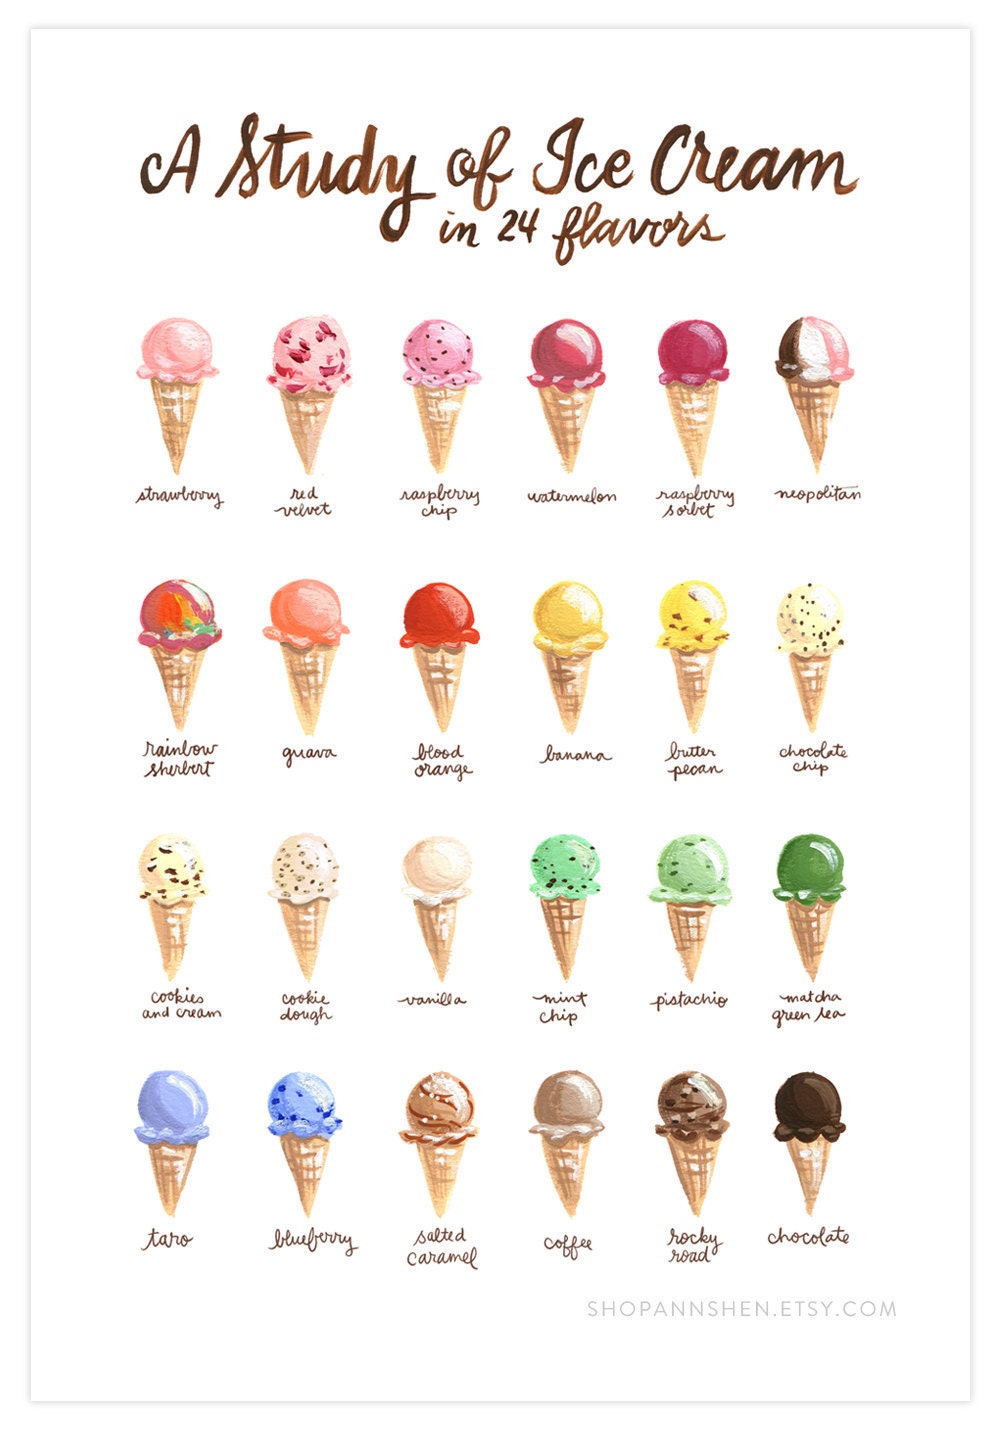 A Study of Ice Cream Print 13x19 by shopannshen on Etsy